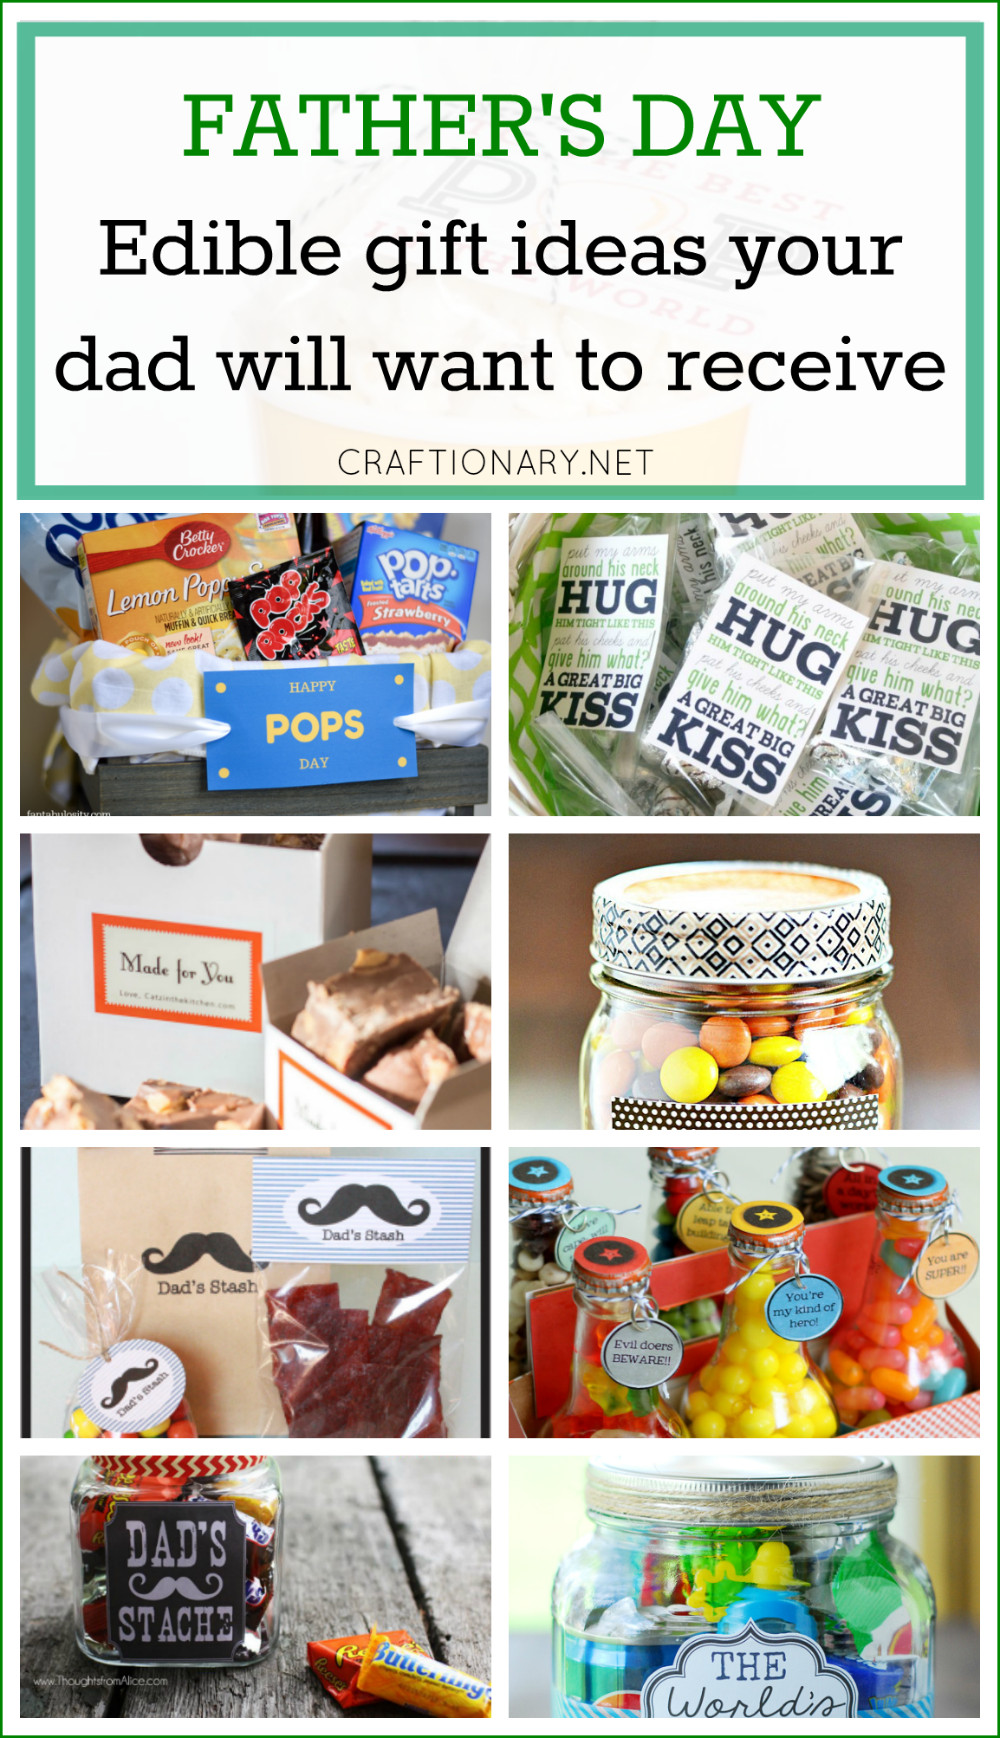 Handmade Father'S Day Gift Ideas
 20 Edible Gift Ideas for Father s Day that your dad will